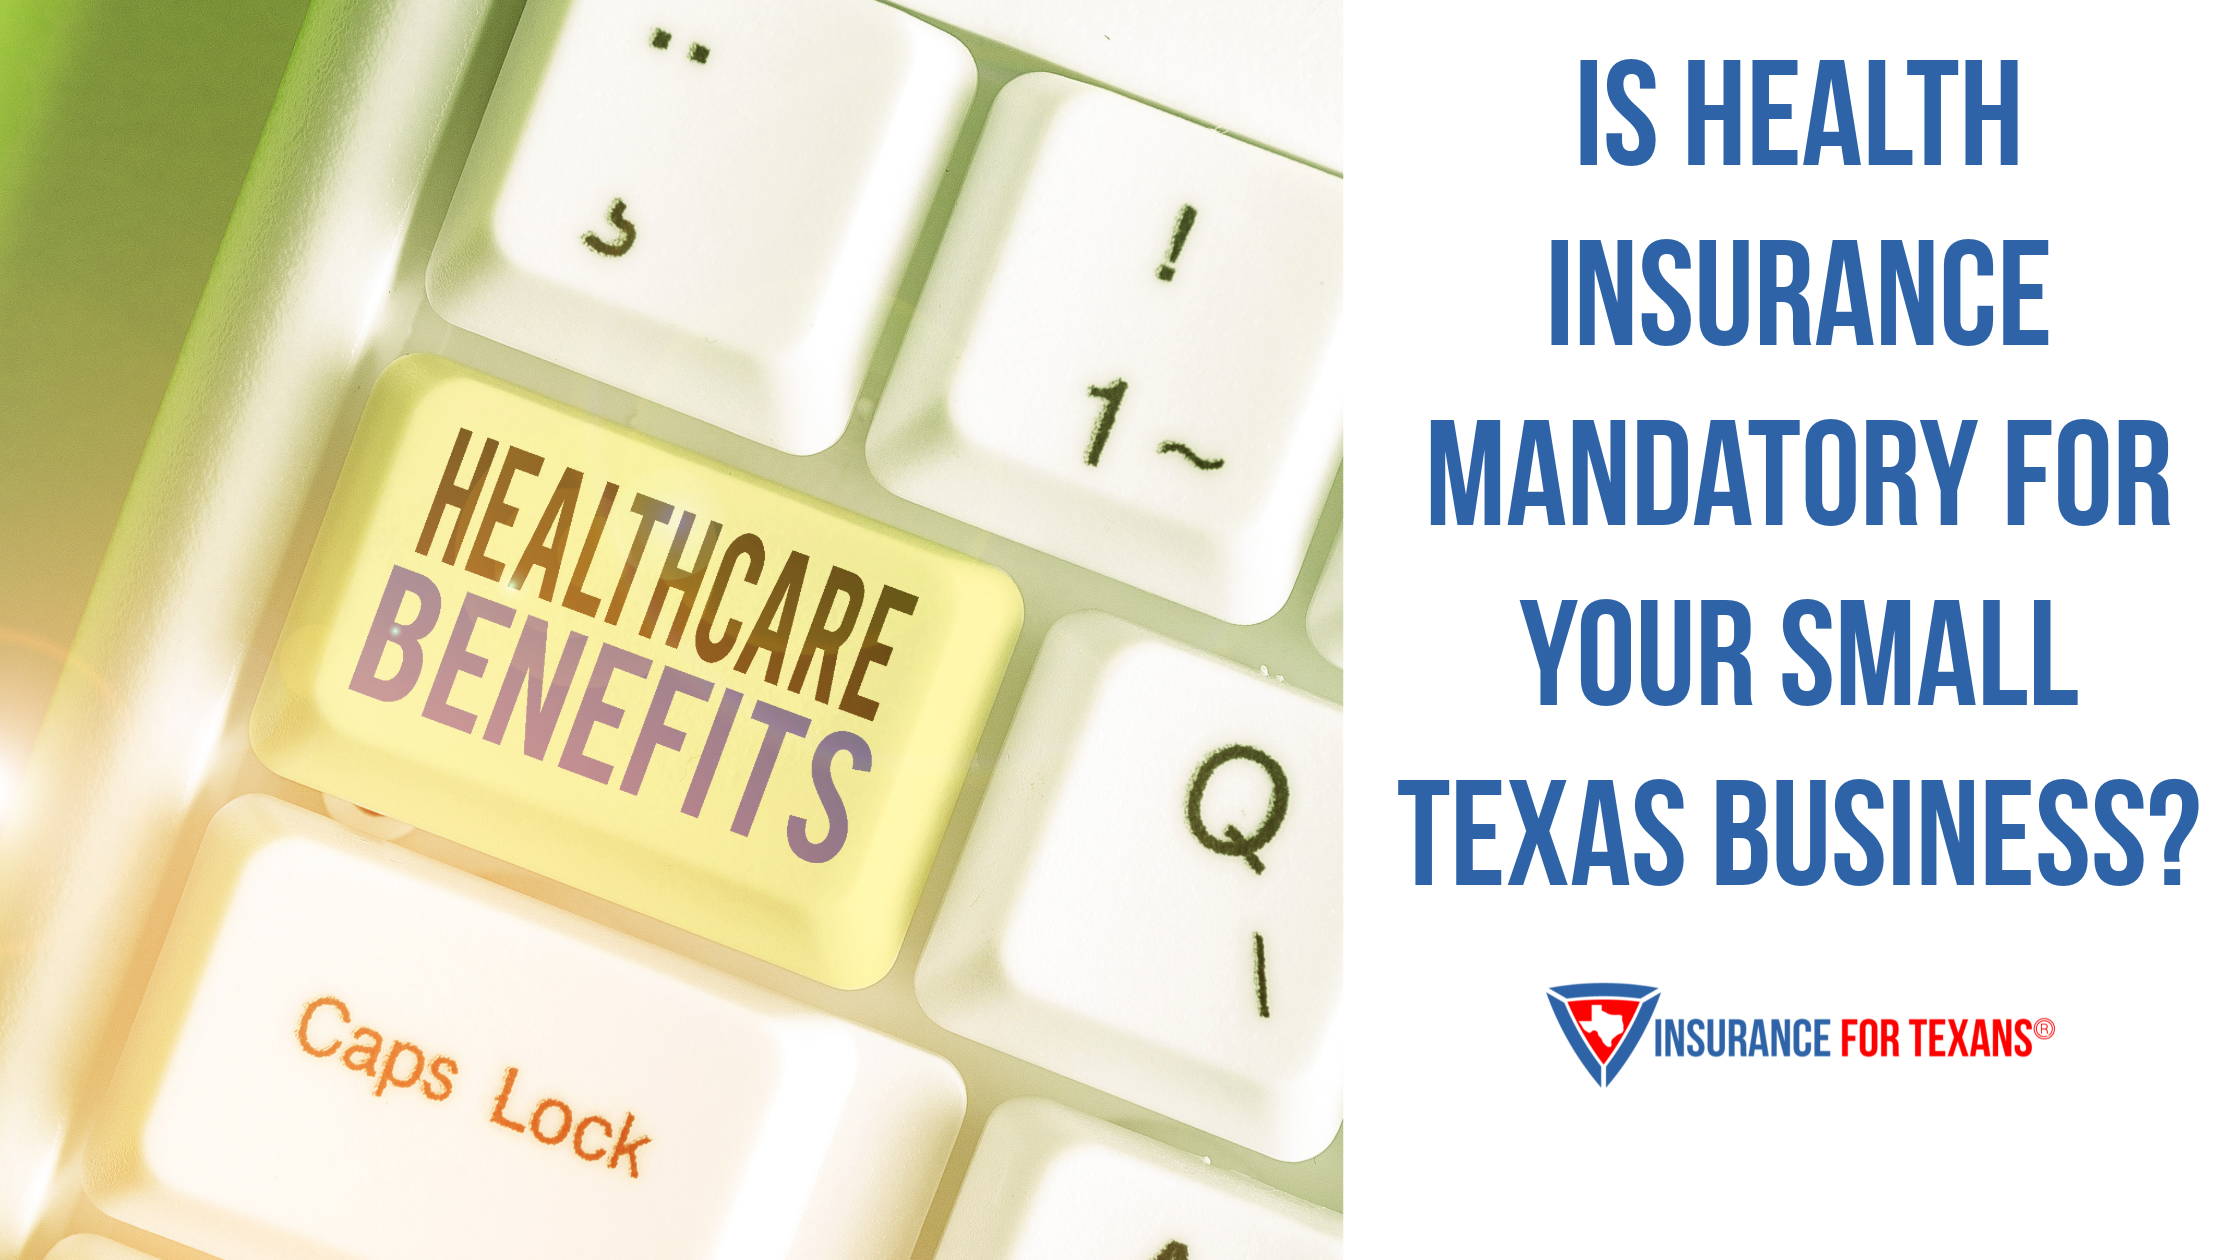 Is Health Insurance Mandatory for Your Small Texas Business?